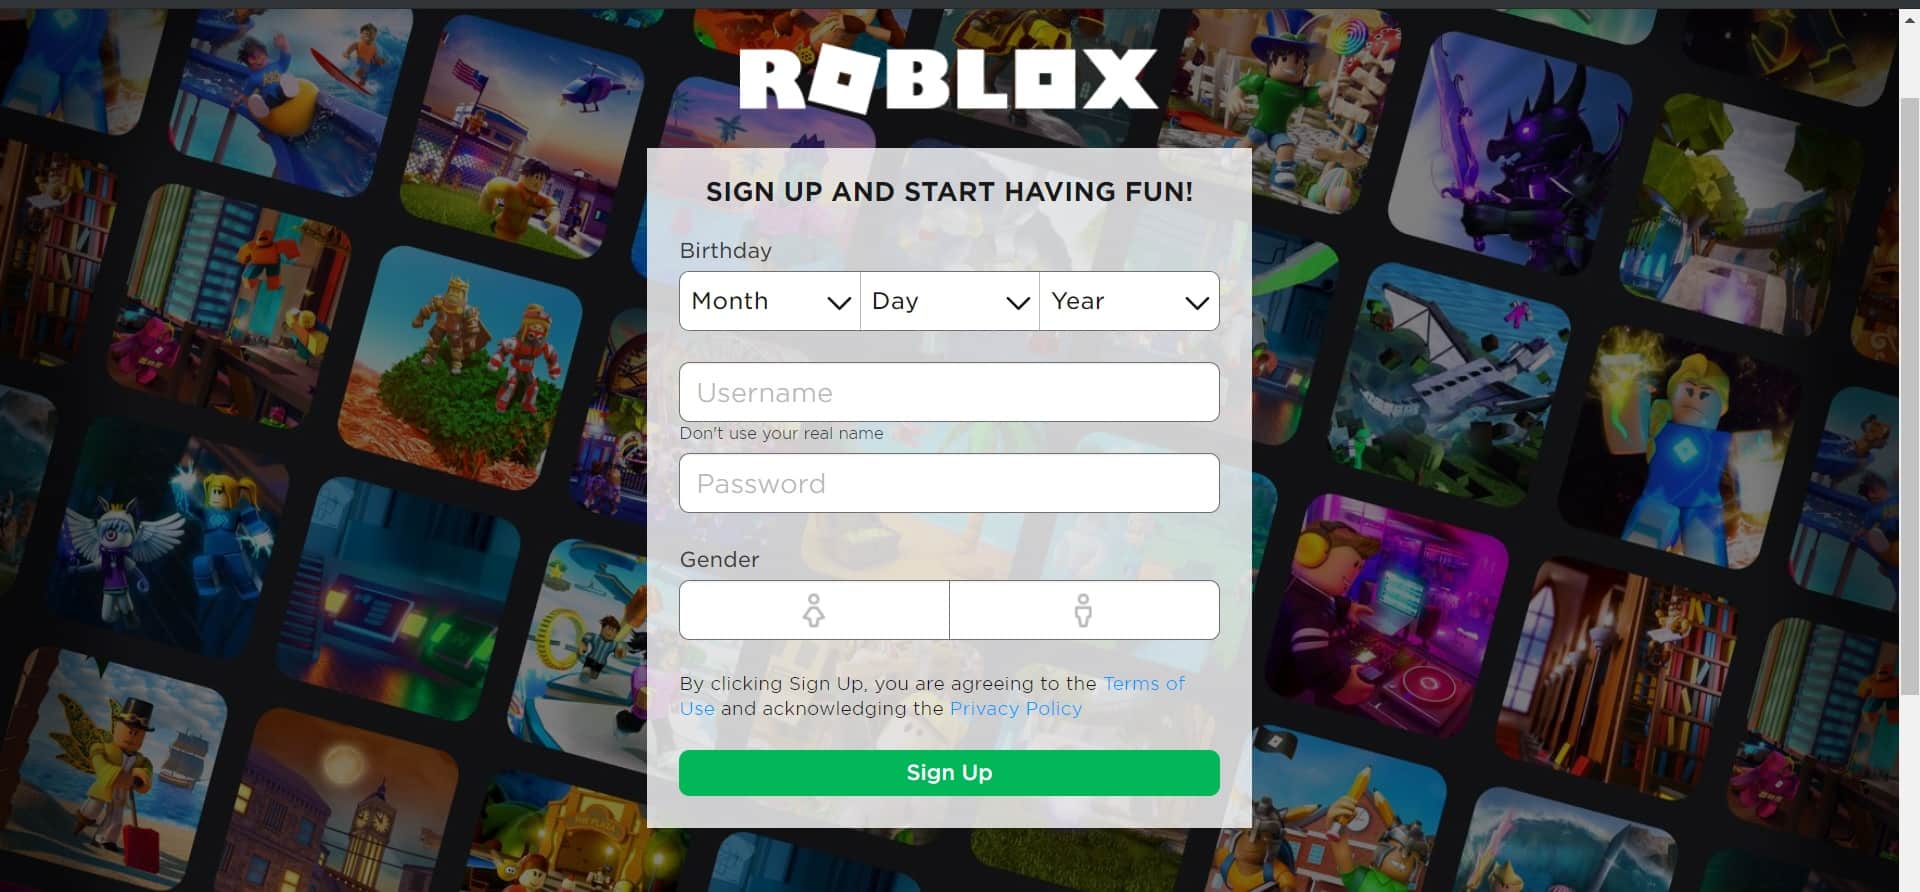 dowload sign up and play roblox roblox high school roblox